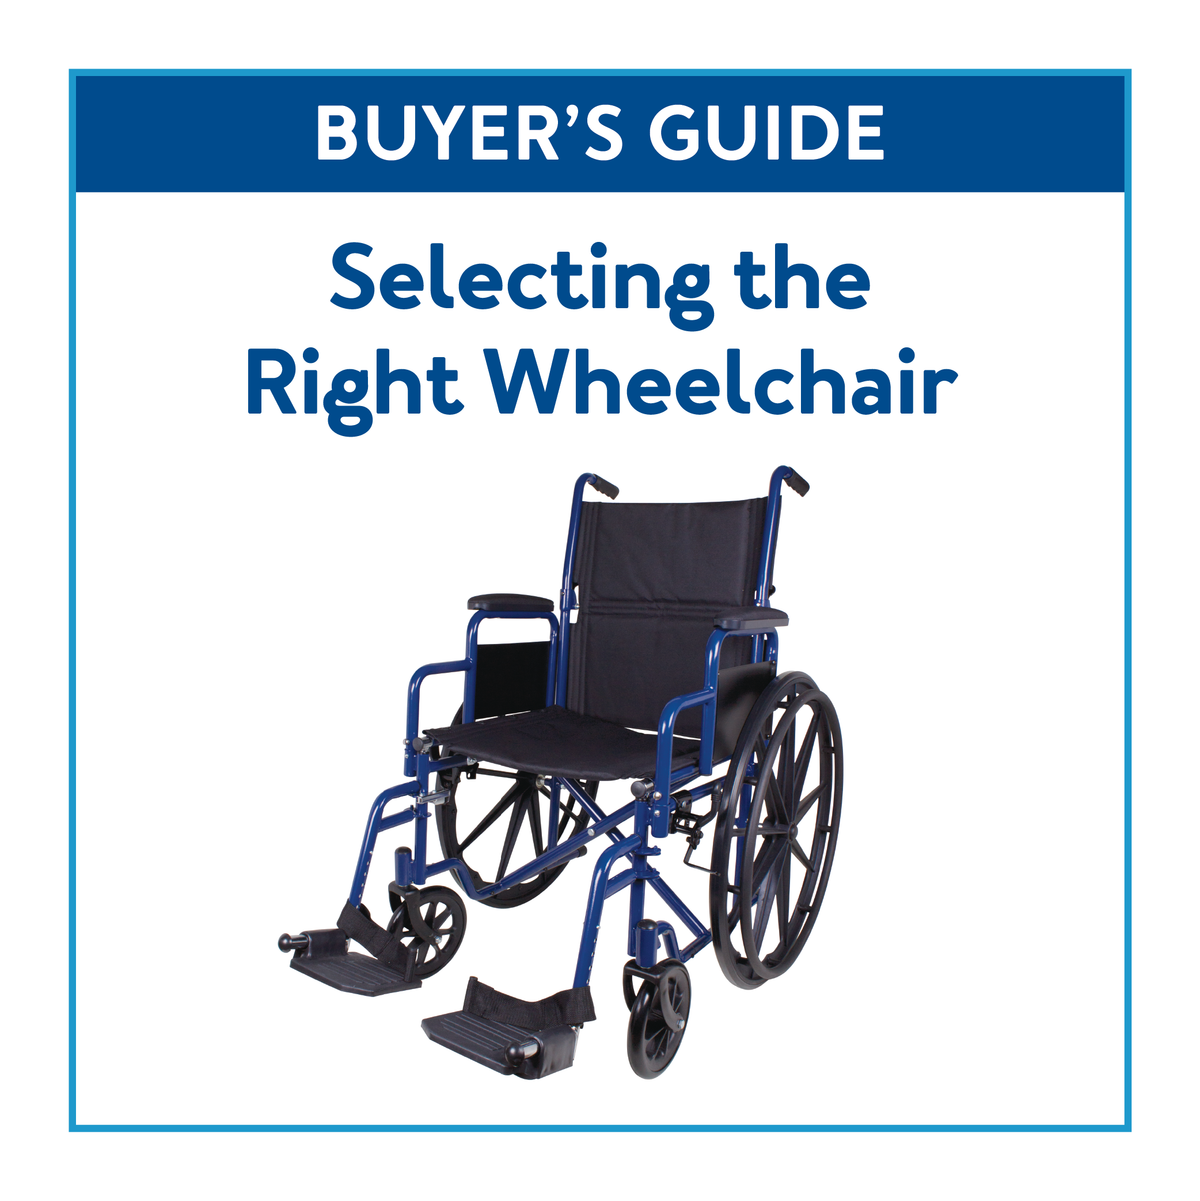 A wheelchair with text, “buyer’s guide: selecting the right wheelchair